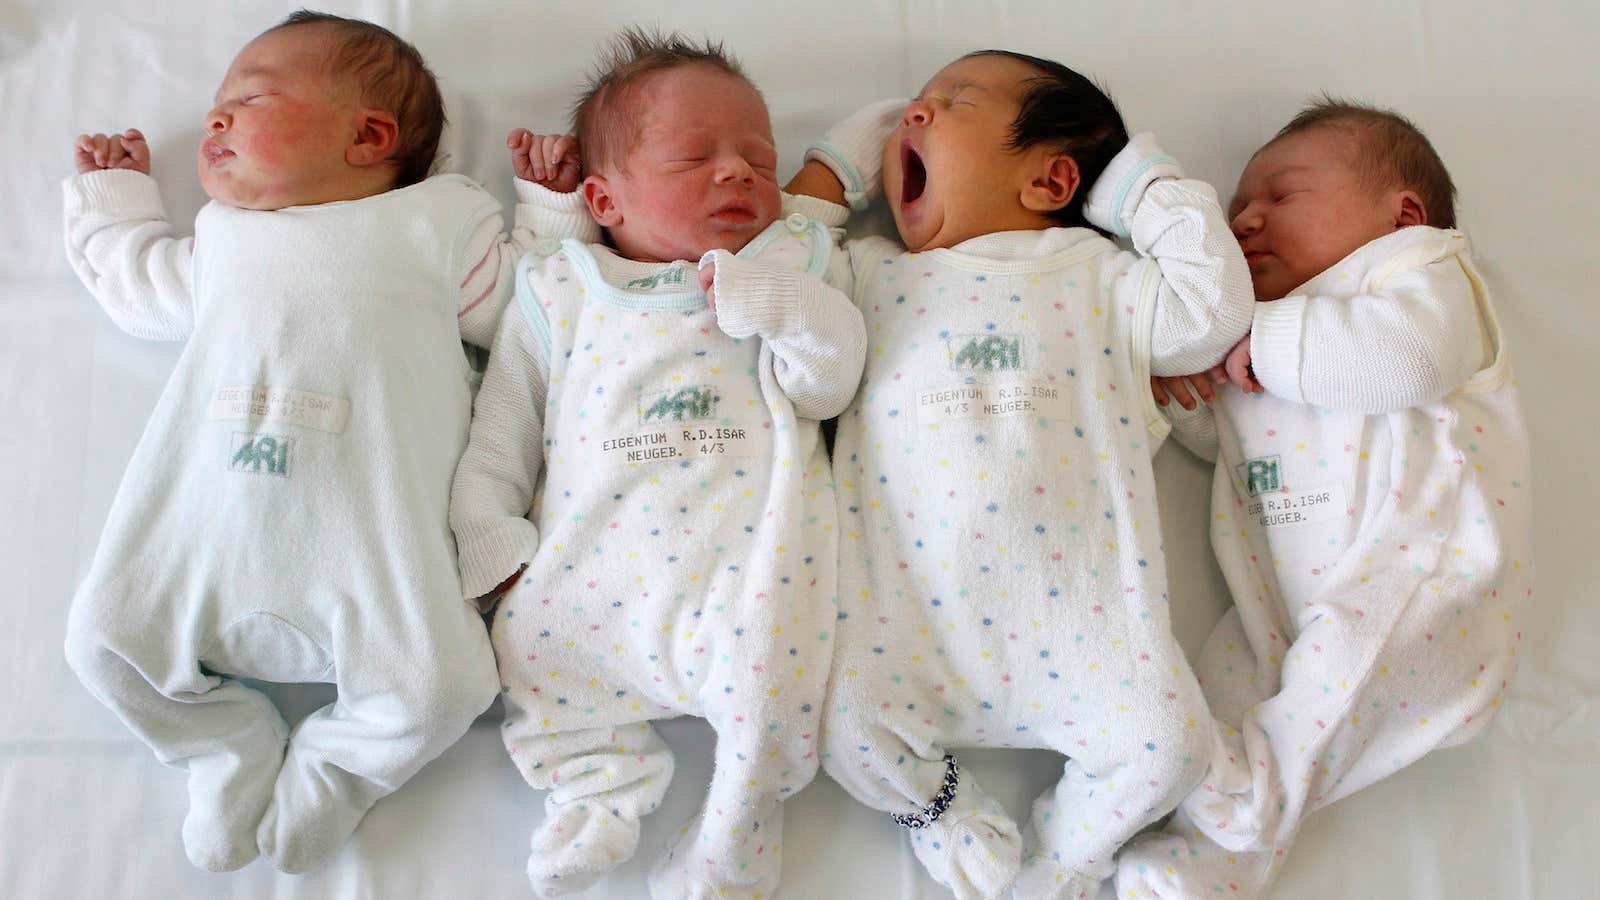 Babies are pictured in a maternity ward at the Munich hospital ‘Rechts der Isar’ January 18, 2011. REUTERS/Michaela Rehle (GERMANY – Tags: HEALTH SOCIETY) –…